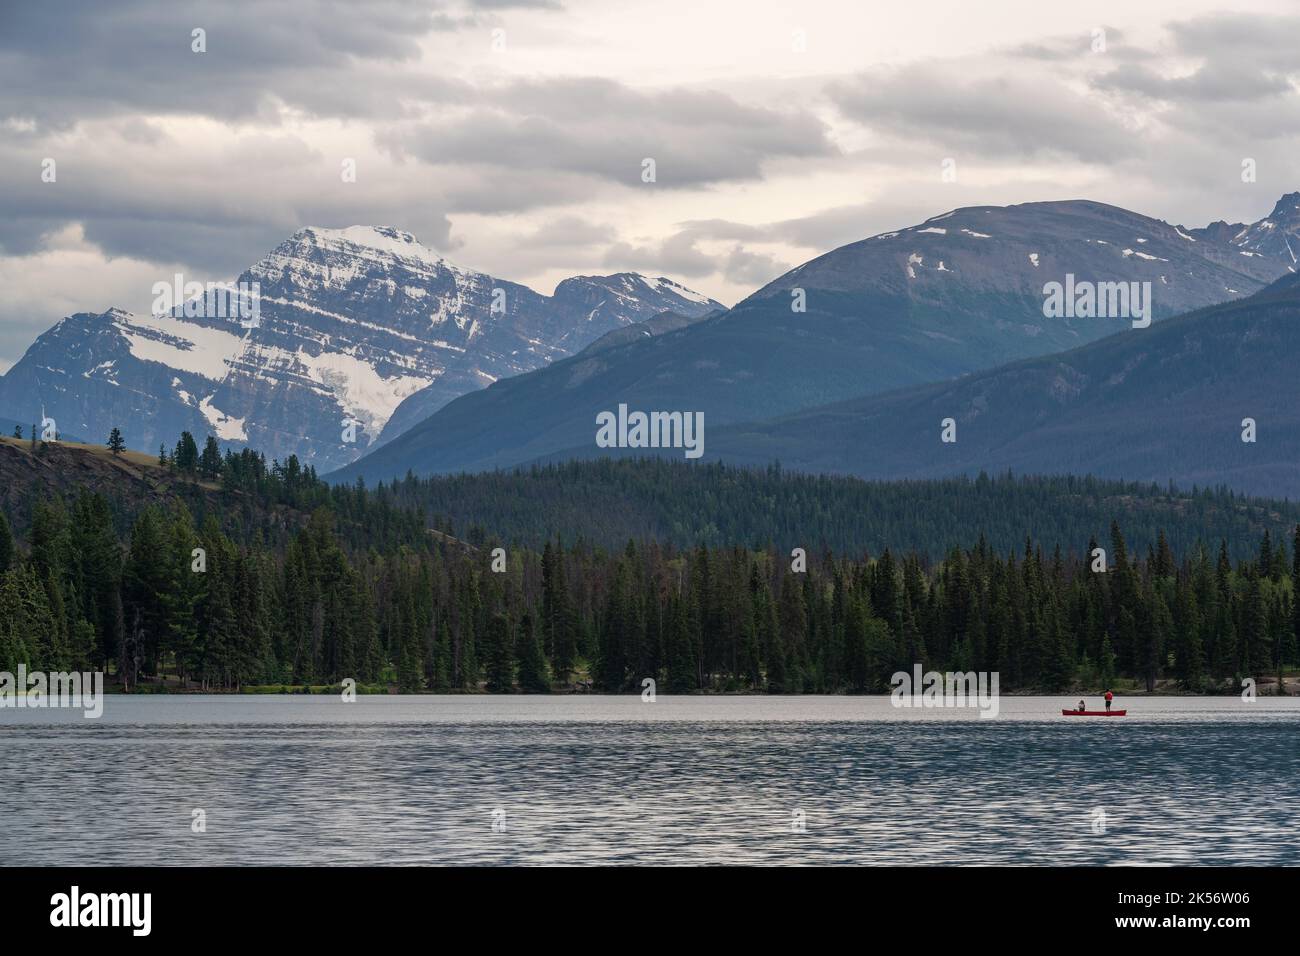 Two people on canoe fishing on Lake Beauvert with Mount Edith Cavell, Jasper national park, Alberta, Canada. Stock Photo